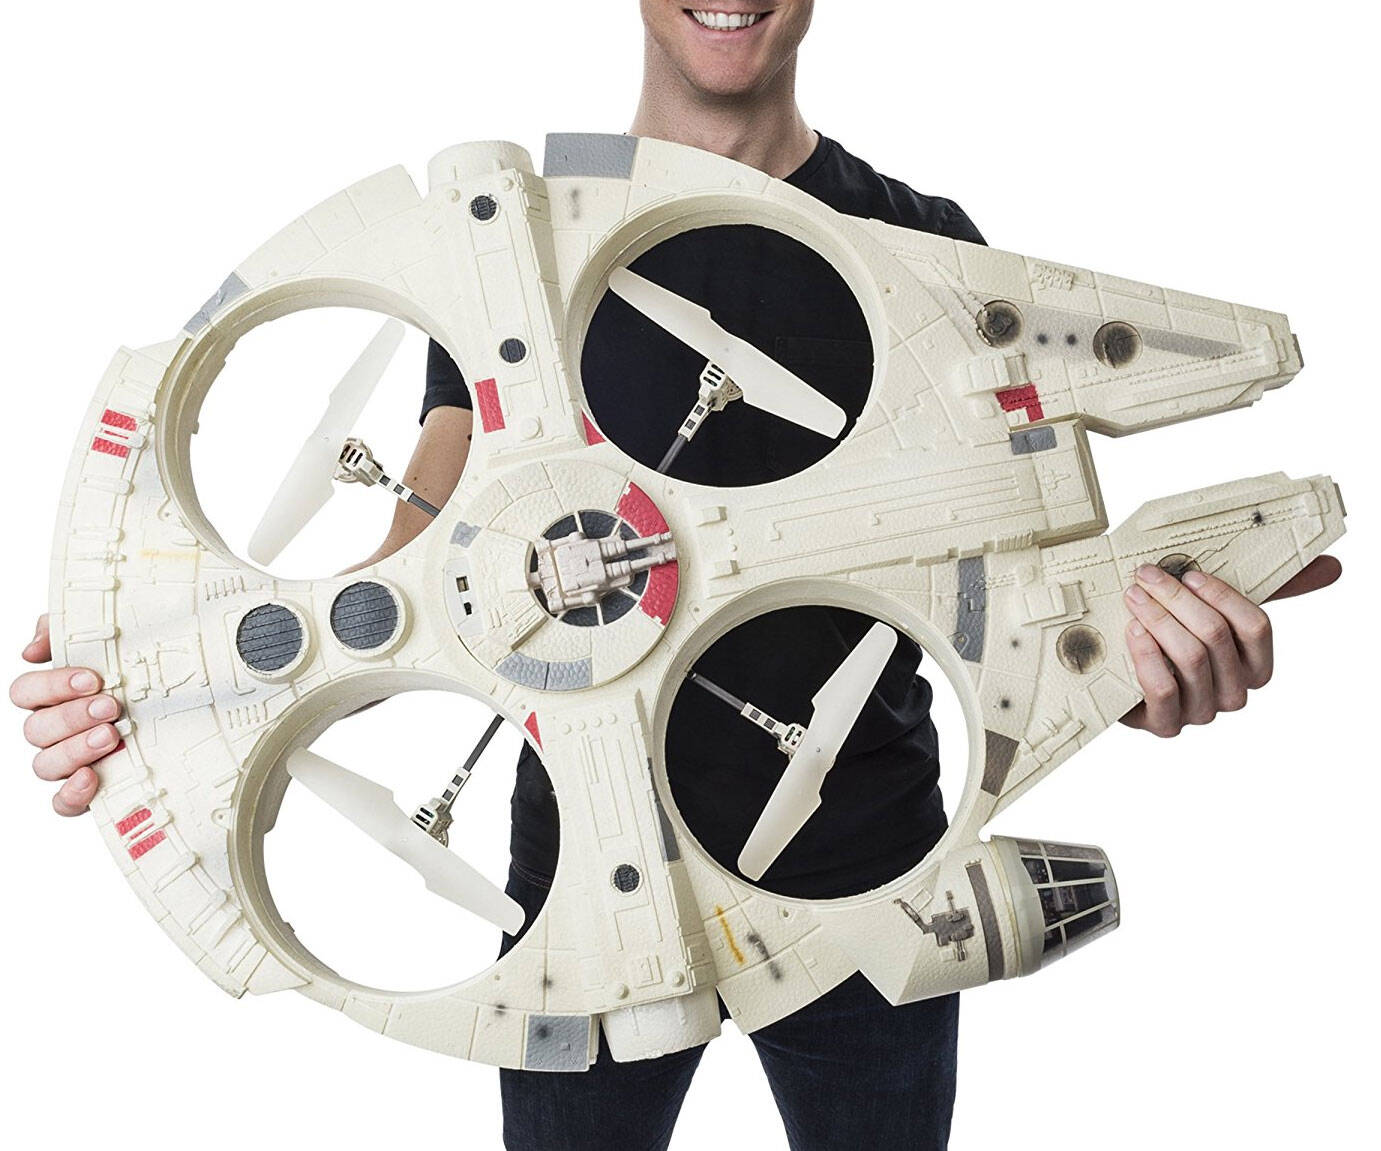 Giant Flying Millennium Falcon Drone - //coolthings.us